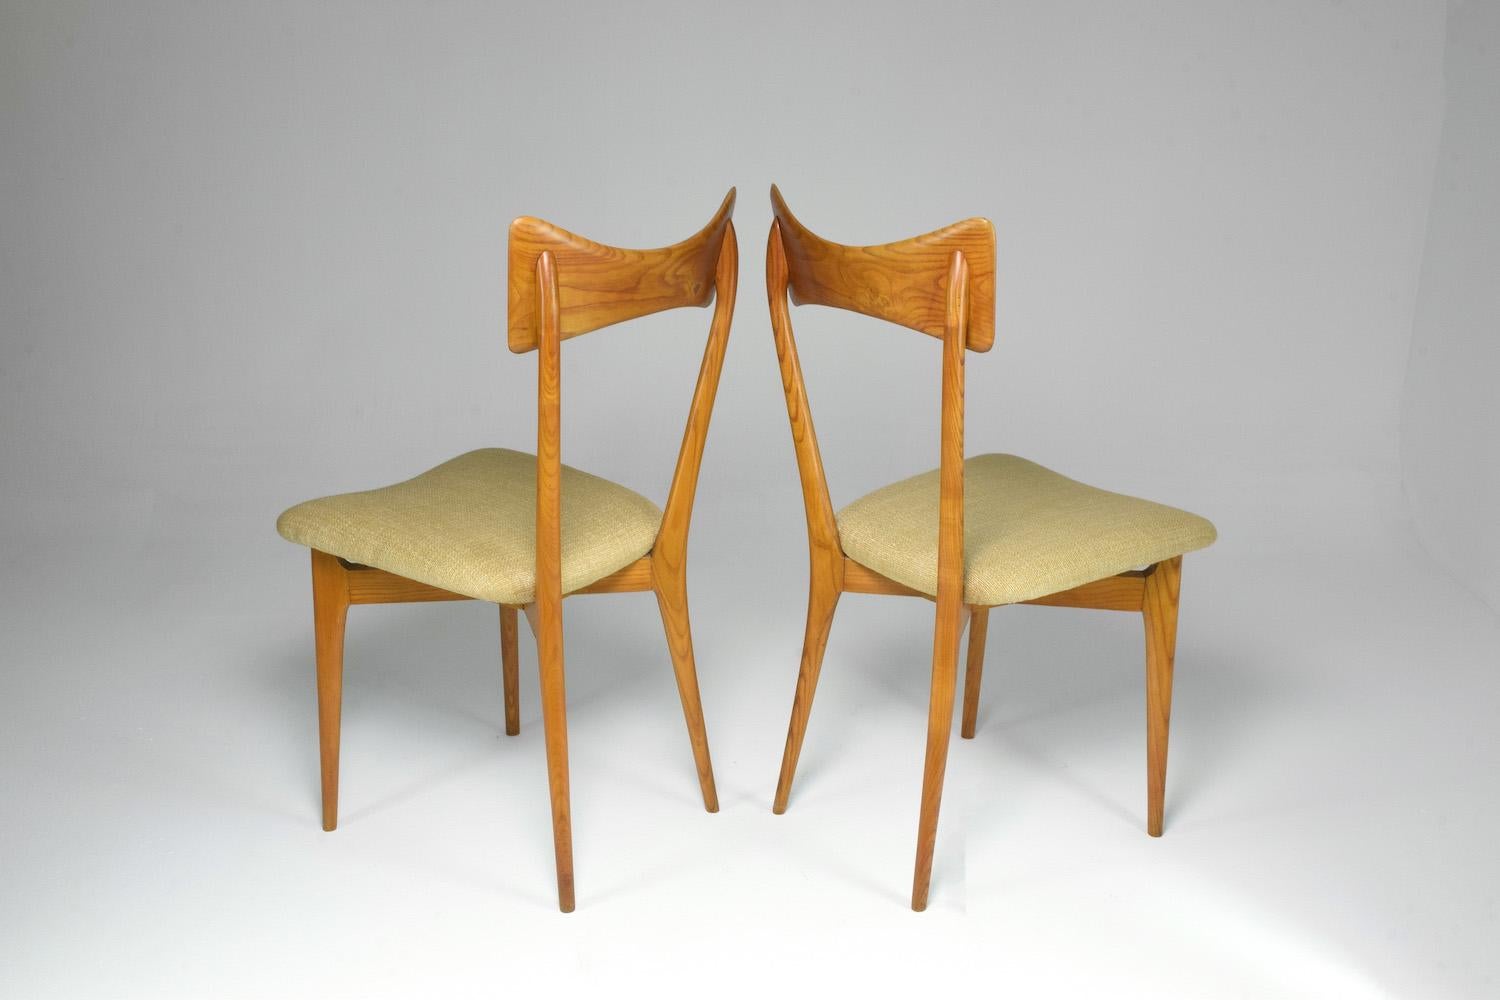 Two 20th century collectible chairs designed by the iconic duo Ico and Luisa Parisi for Ariberto Colombo in the mid-1950s. This classic design is highlighted by the curved backrest, splayed and tapered legs. 

In fully restored condition with a